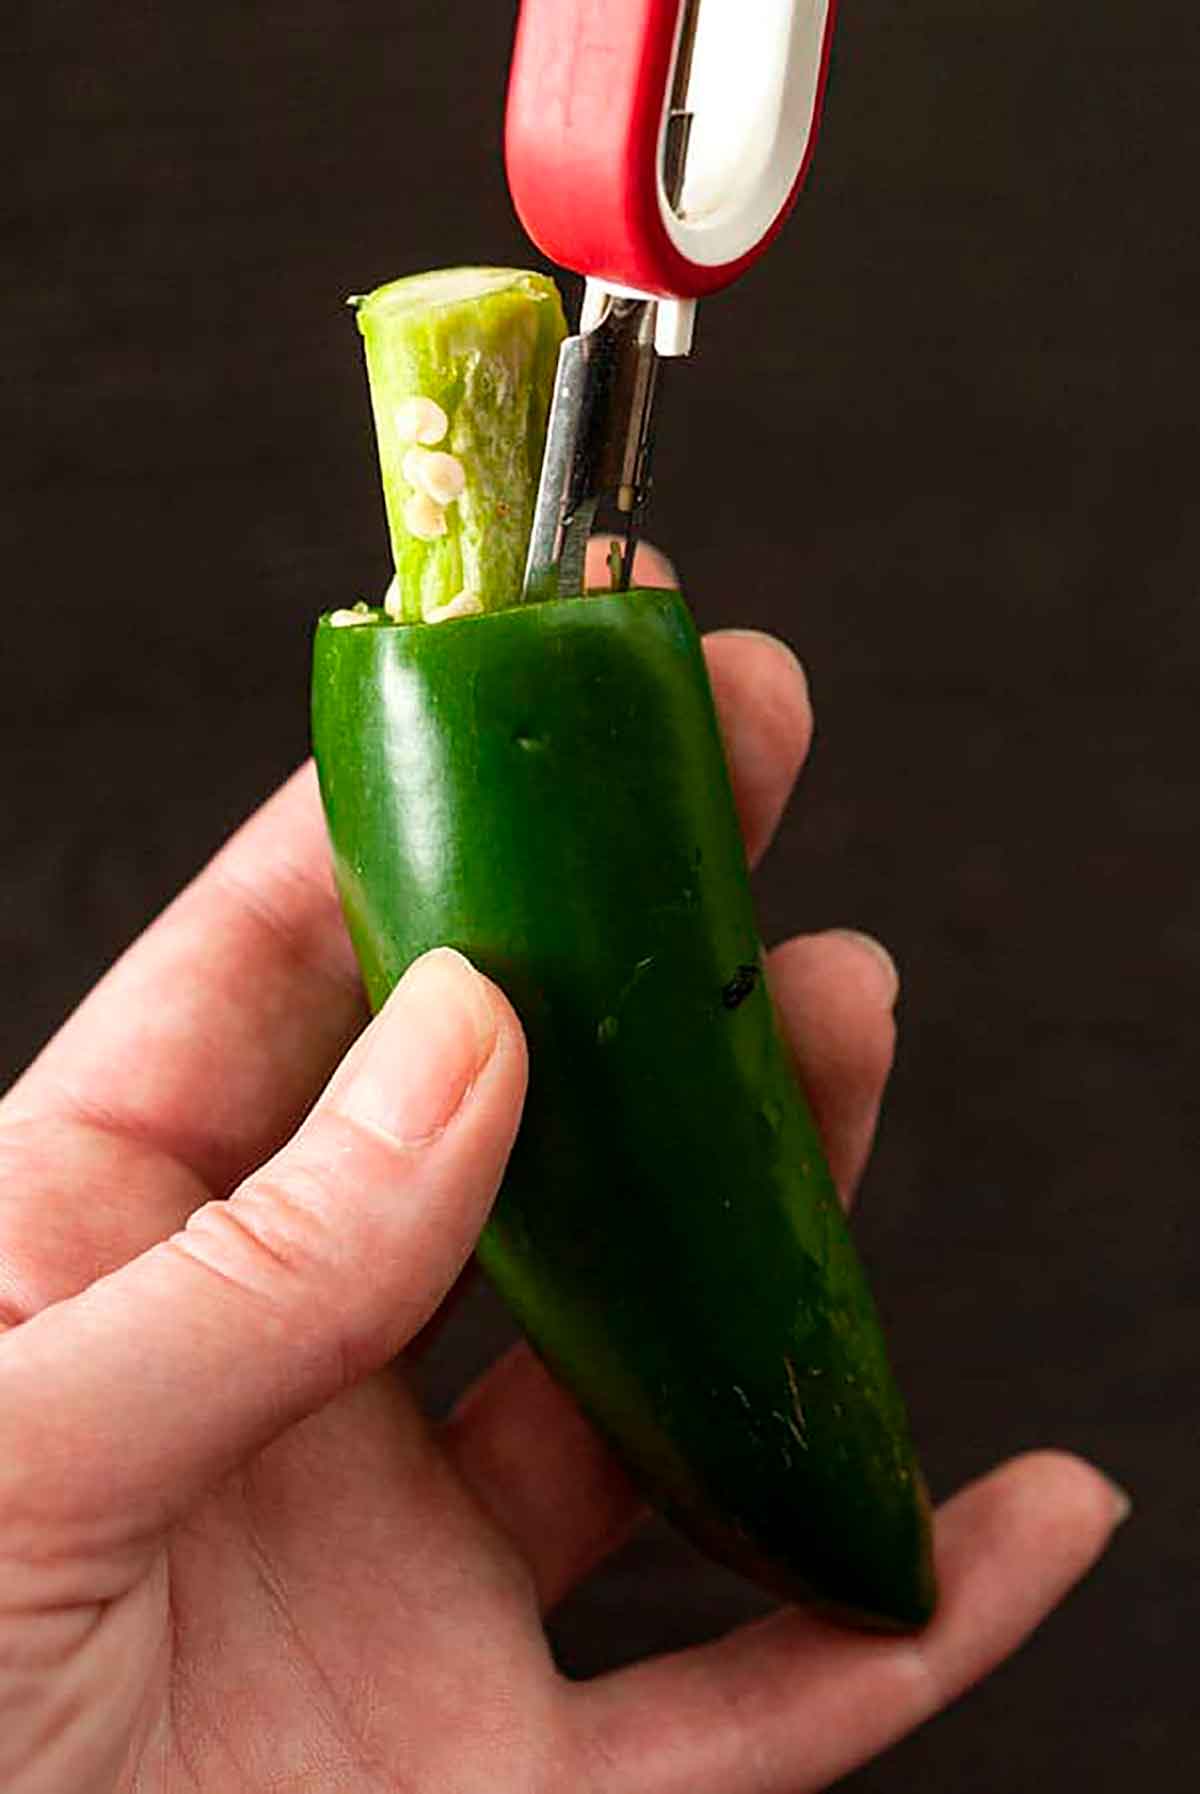 Hands using an apple peeler to remove the center of a jalapeño pepper.